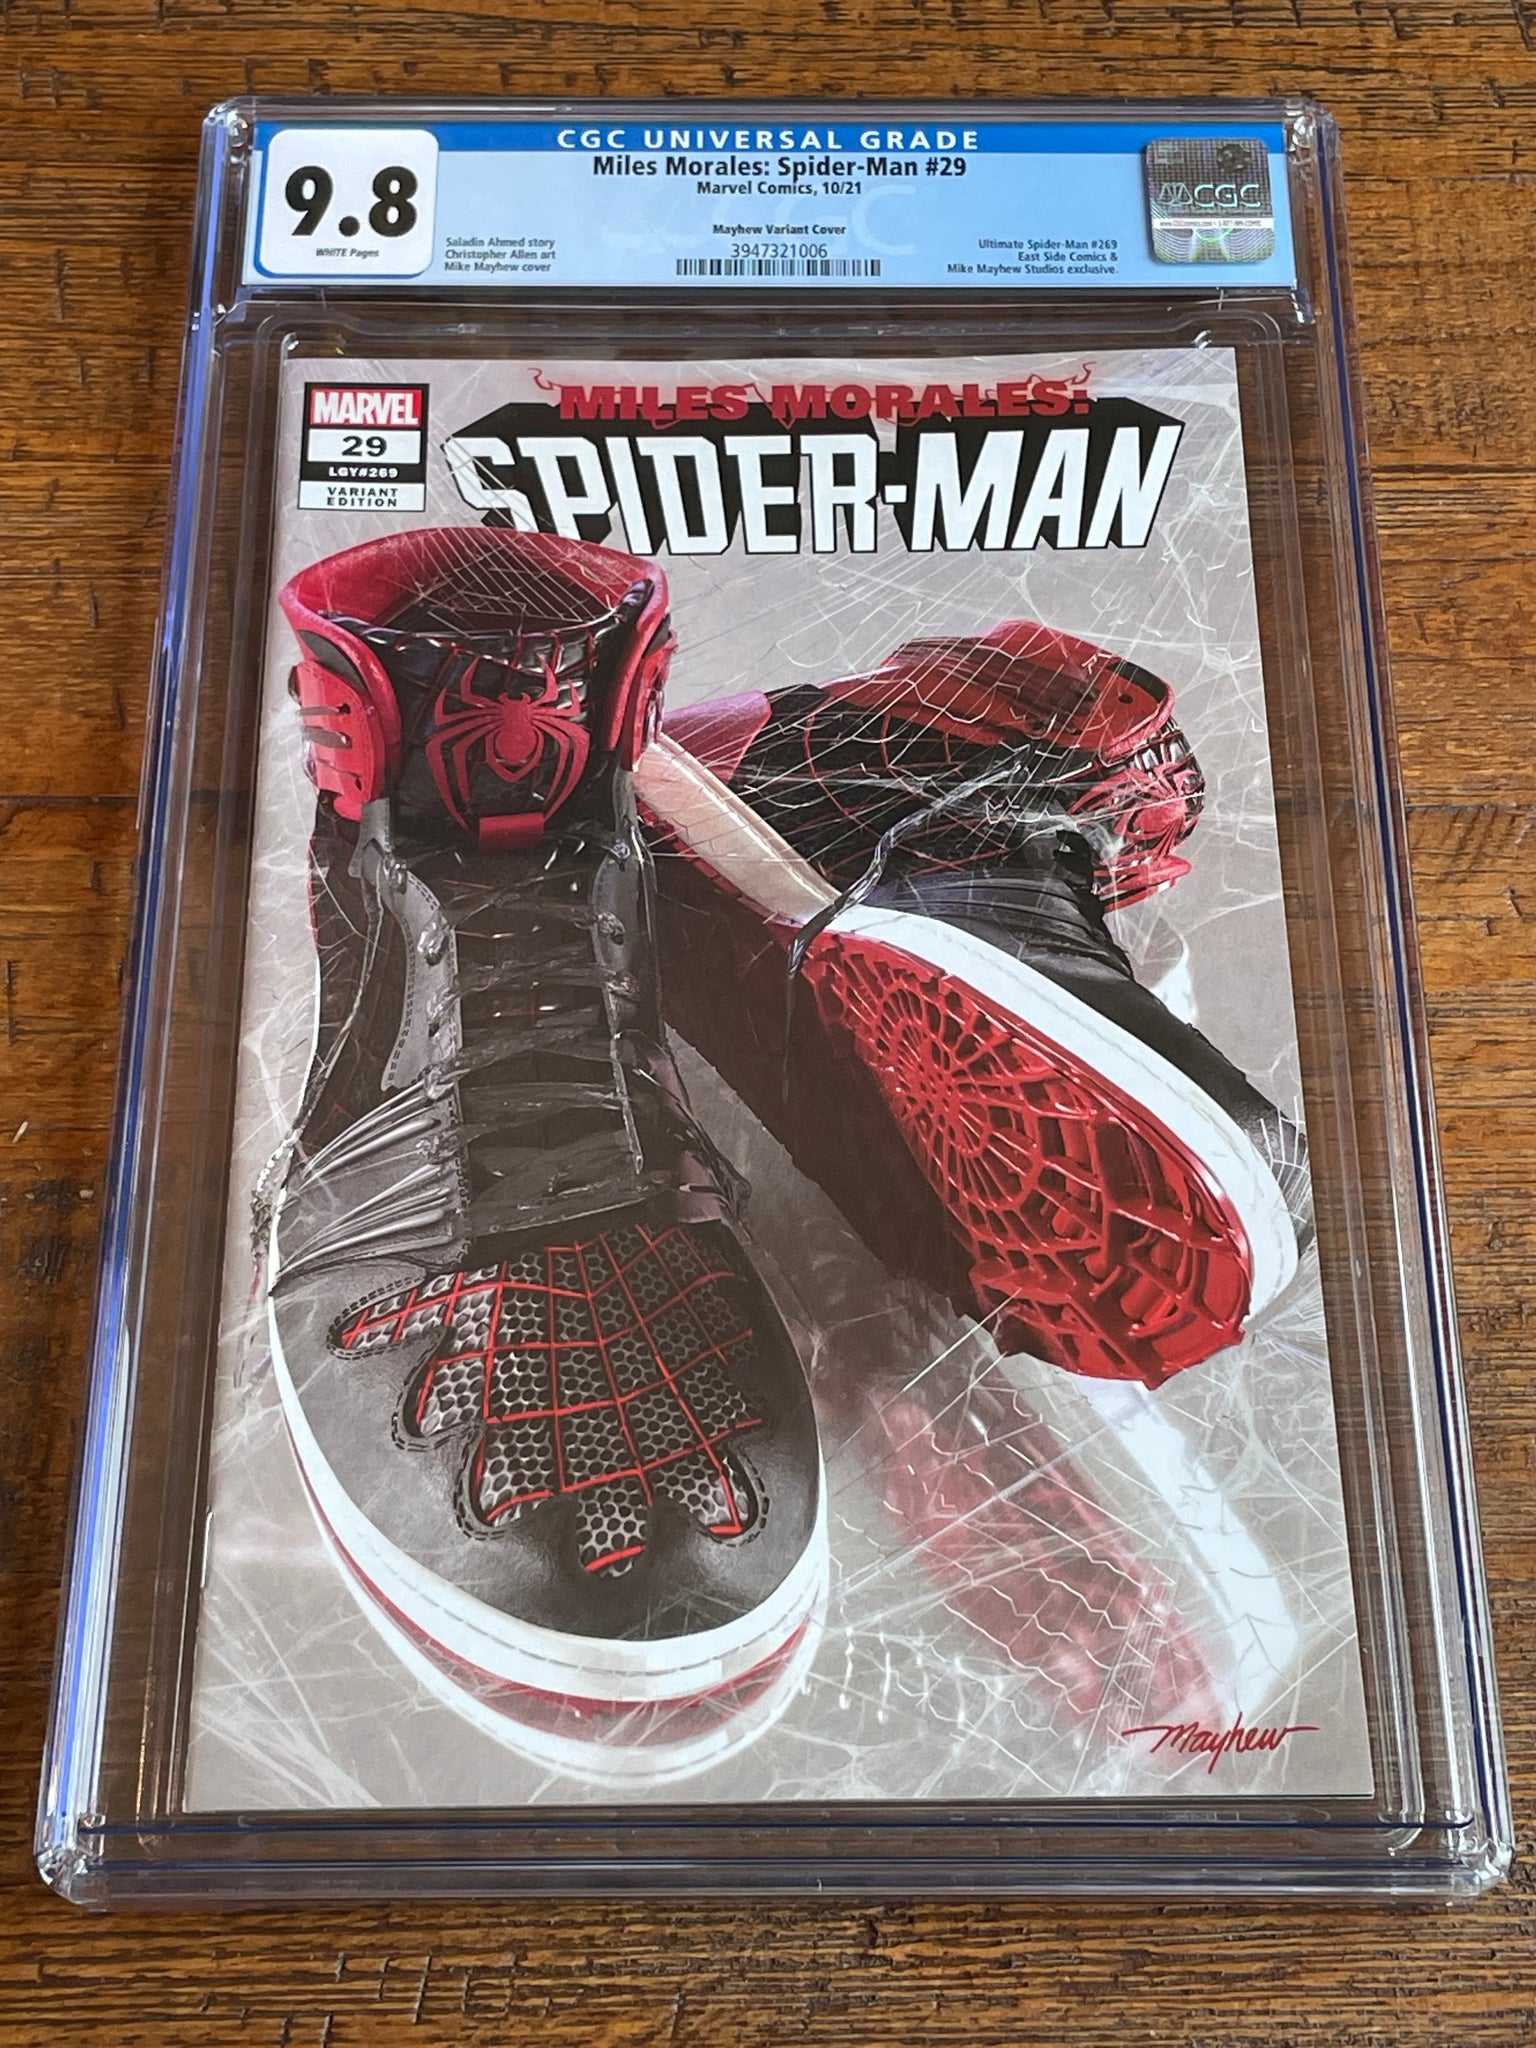 MILES MORALES: SPIDER-MAN #29 CGC 9.8 MIKE MAYHEW SNEAKER TRADE DRESS VARIANT-A